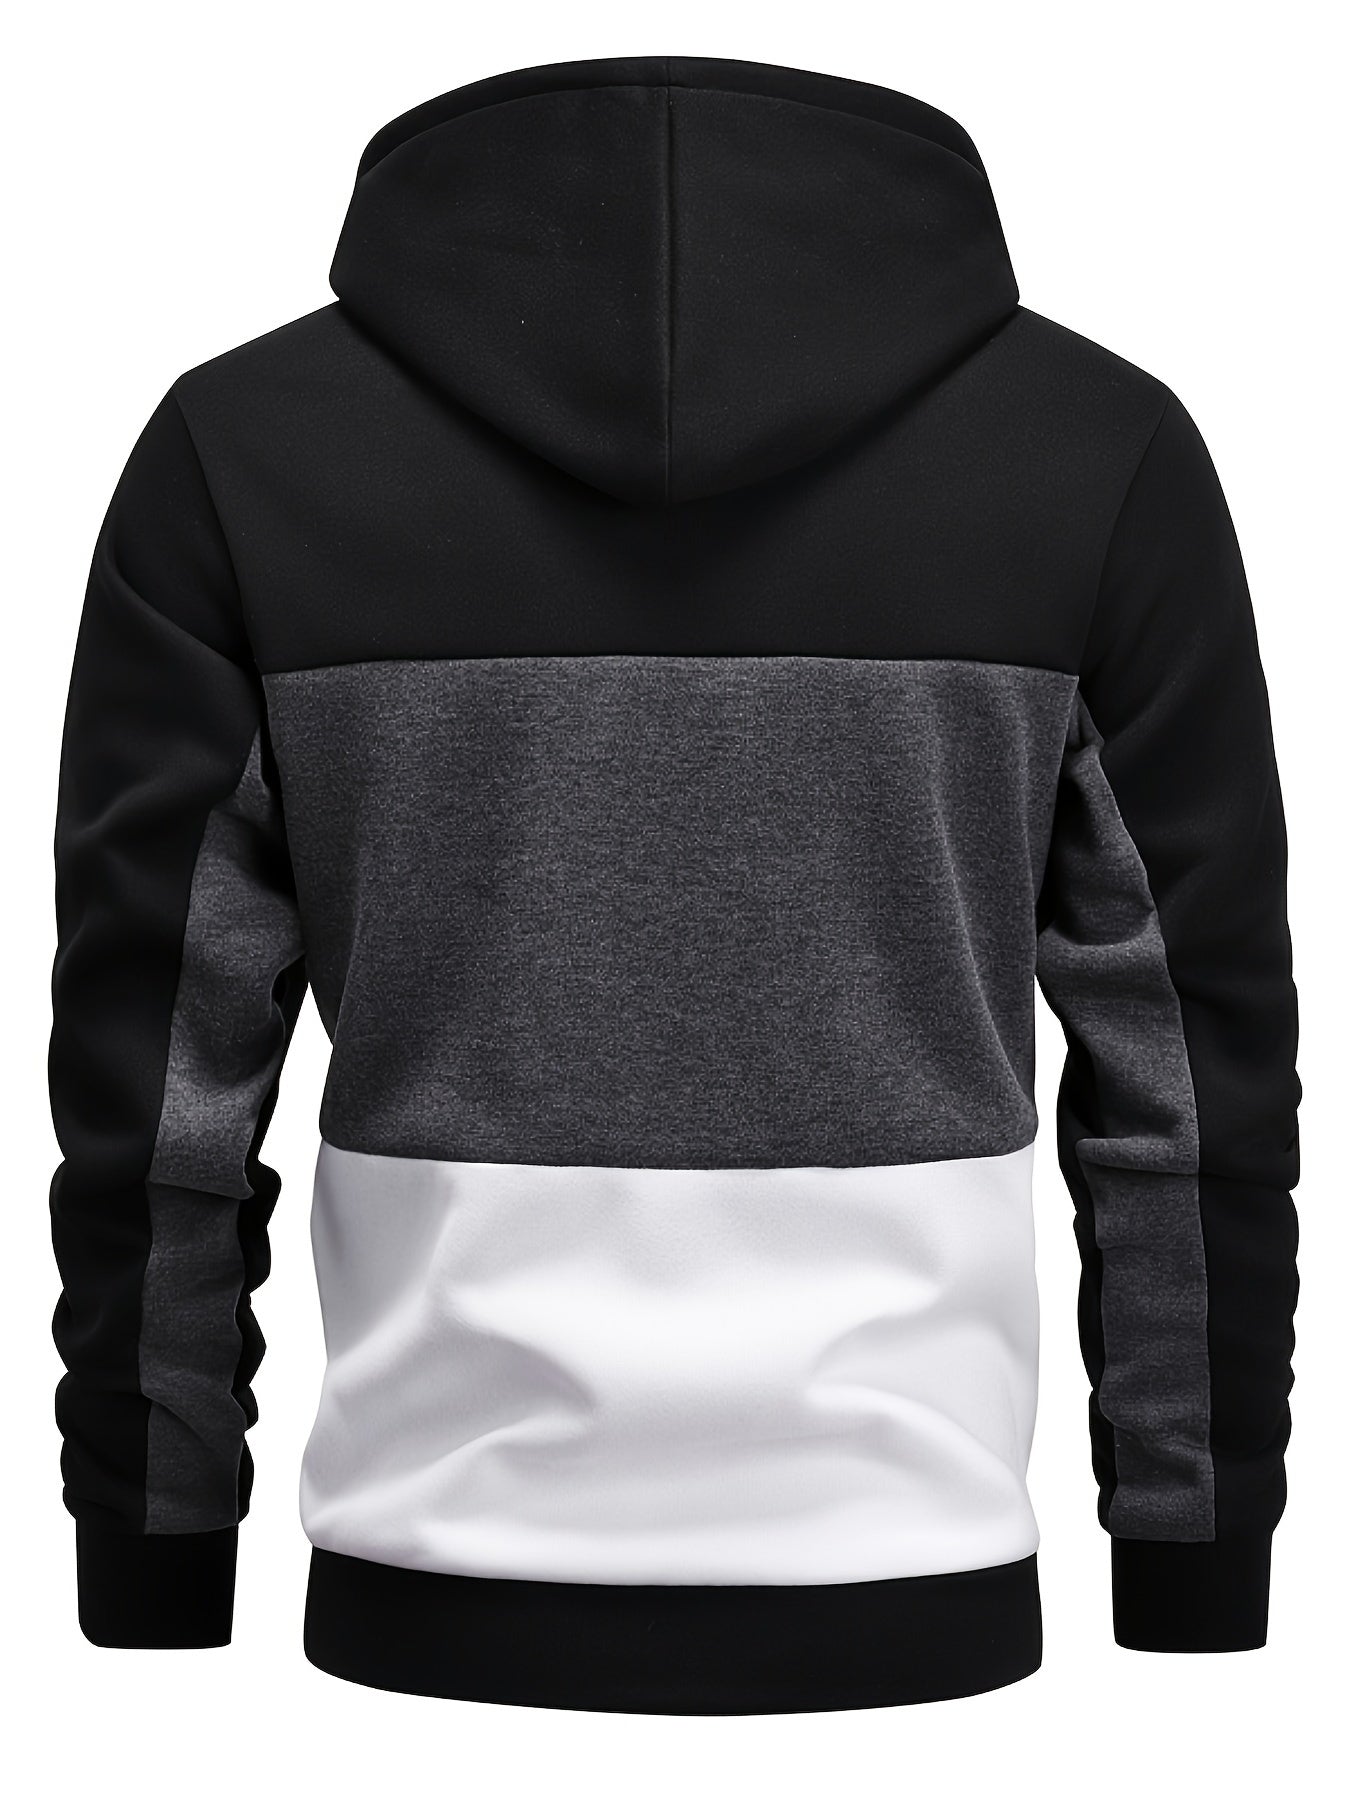 Color Block Hoodie, Cool Hoodies For Men, Men's Casual Graphic Design Pullover Hooded Sweatshirt With Kangaroo Pocket Streetwear For Winter Fall, As Gifts